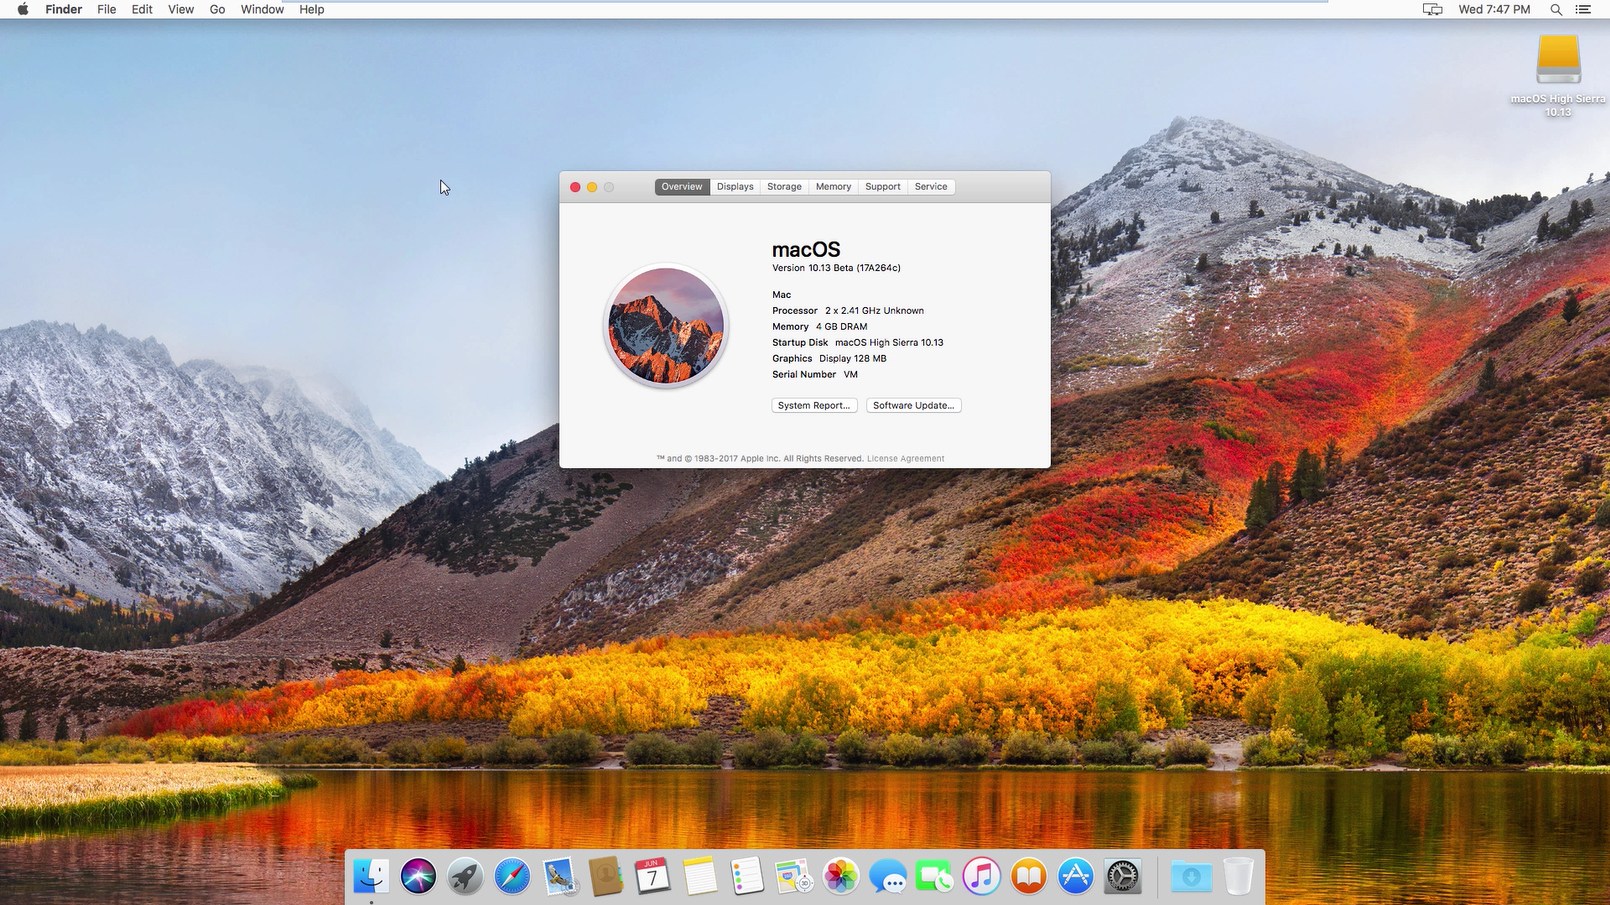 apple pages for high sierra download